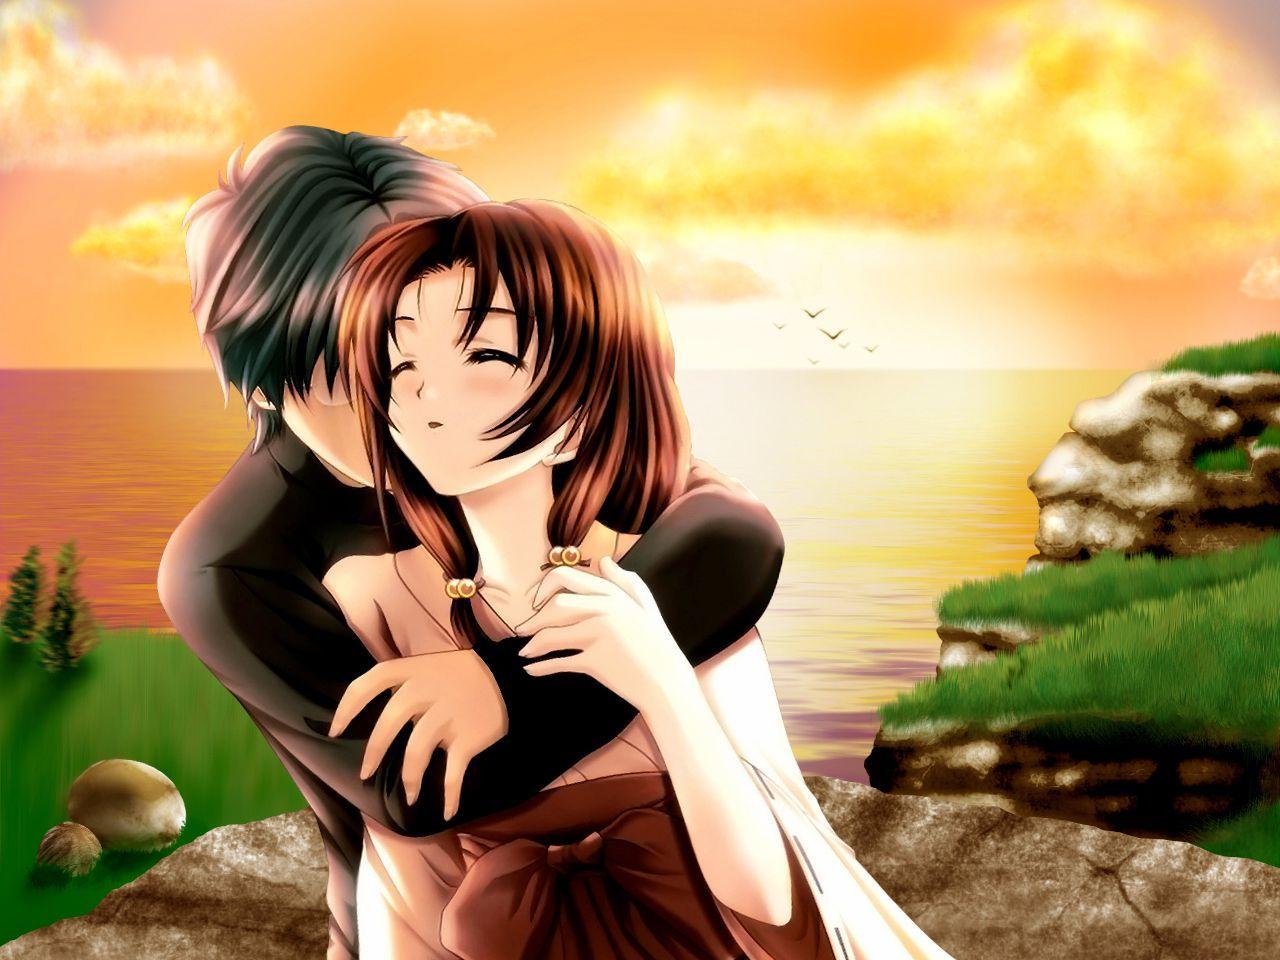 Cute Hd Anime Couple Dp Wallpapers Wallpaper Cave Send dp for whatsapp love images for talk free to everyone.